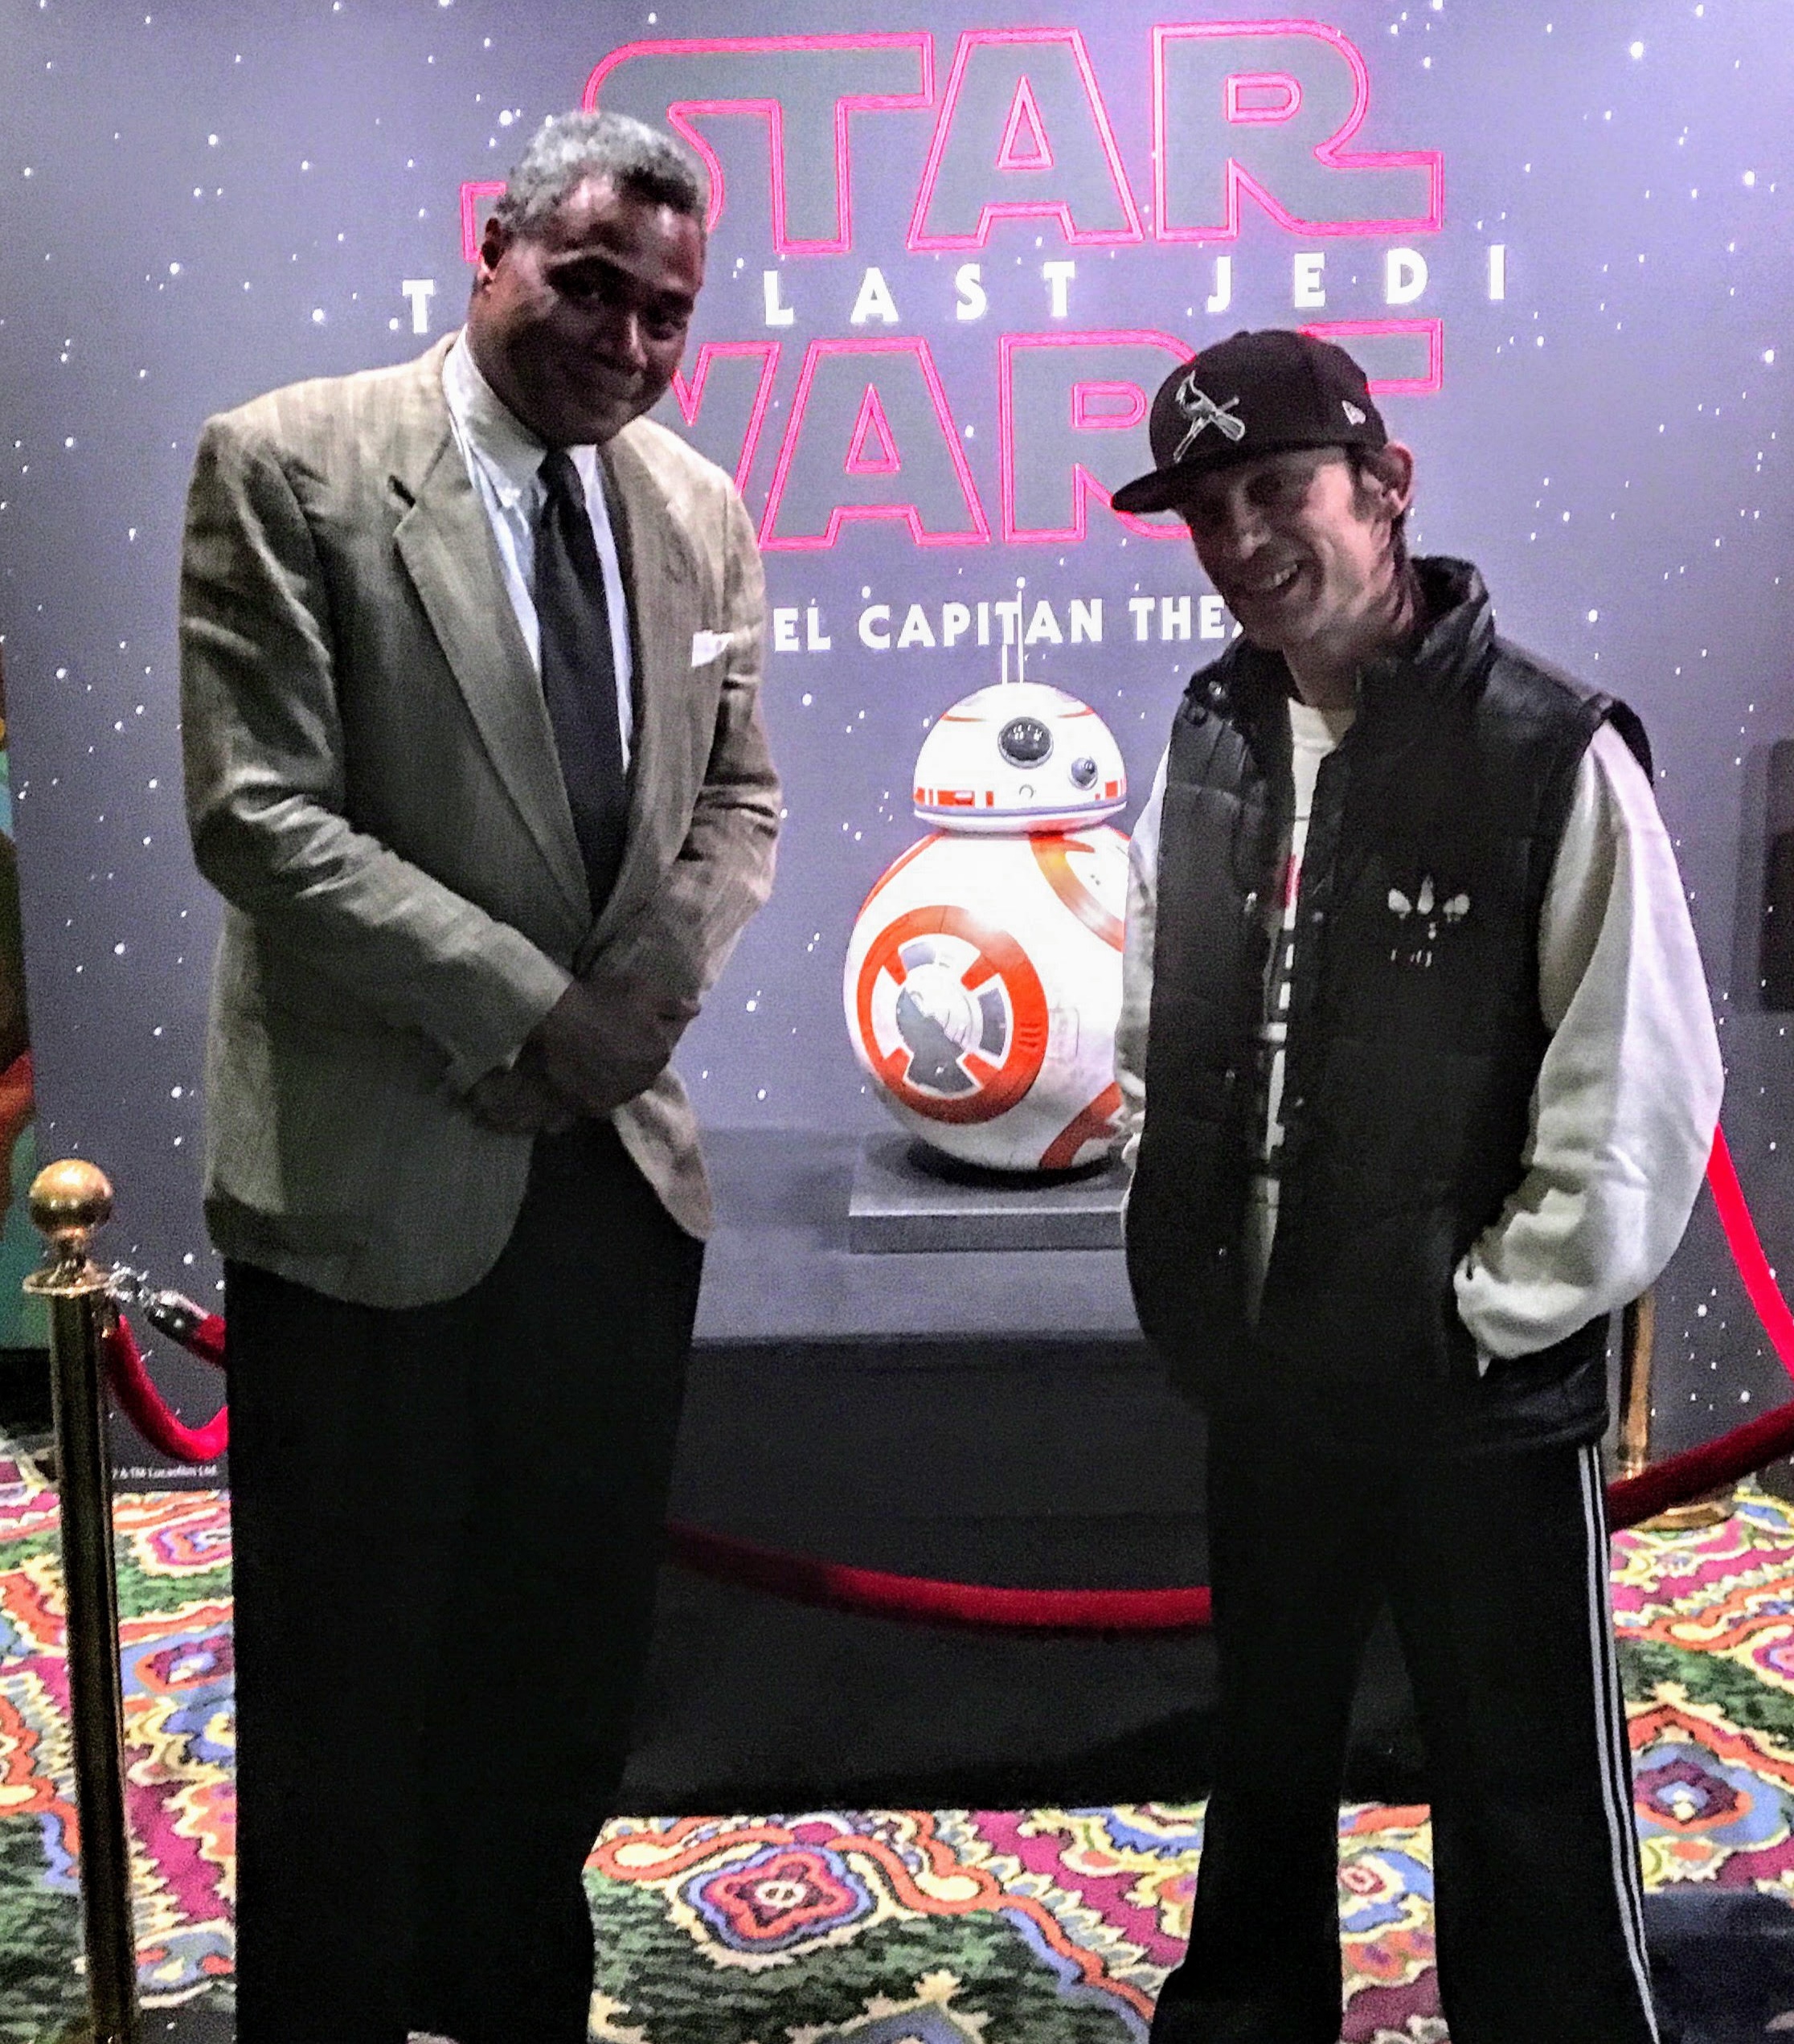 2 Actors Take A Photo With A New Character: Excaliber Shakespeare Company Los Angeles Archival Project Members Darryl Maximilian Robinson and Danny Belrose take a photo with a new Star Wars figure.